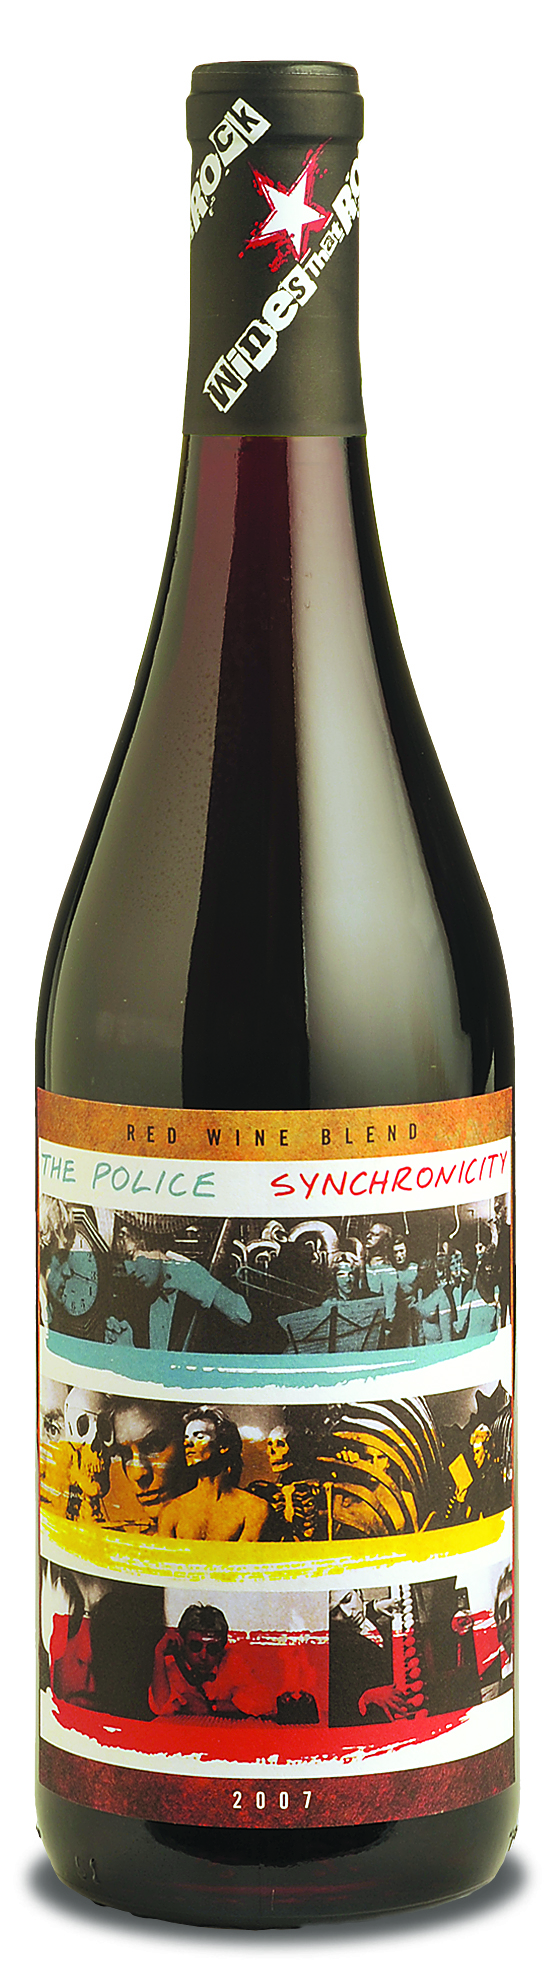 Police Synchronicity Red Wine Blend